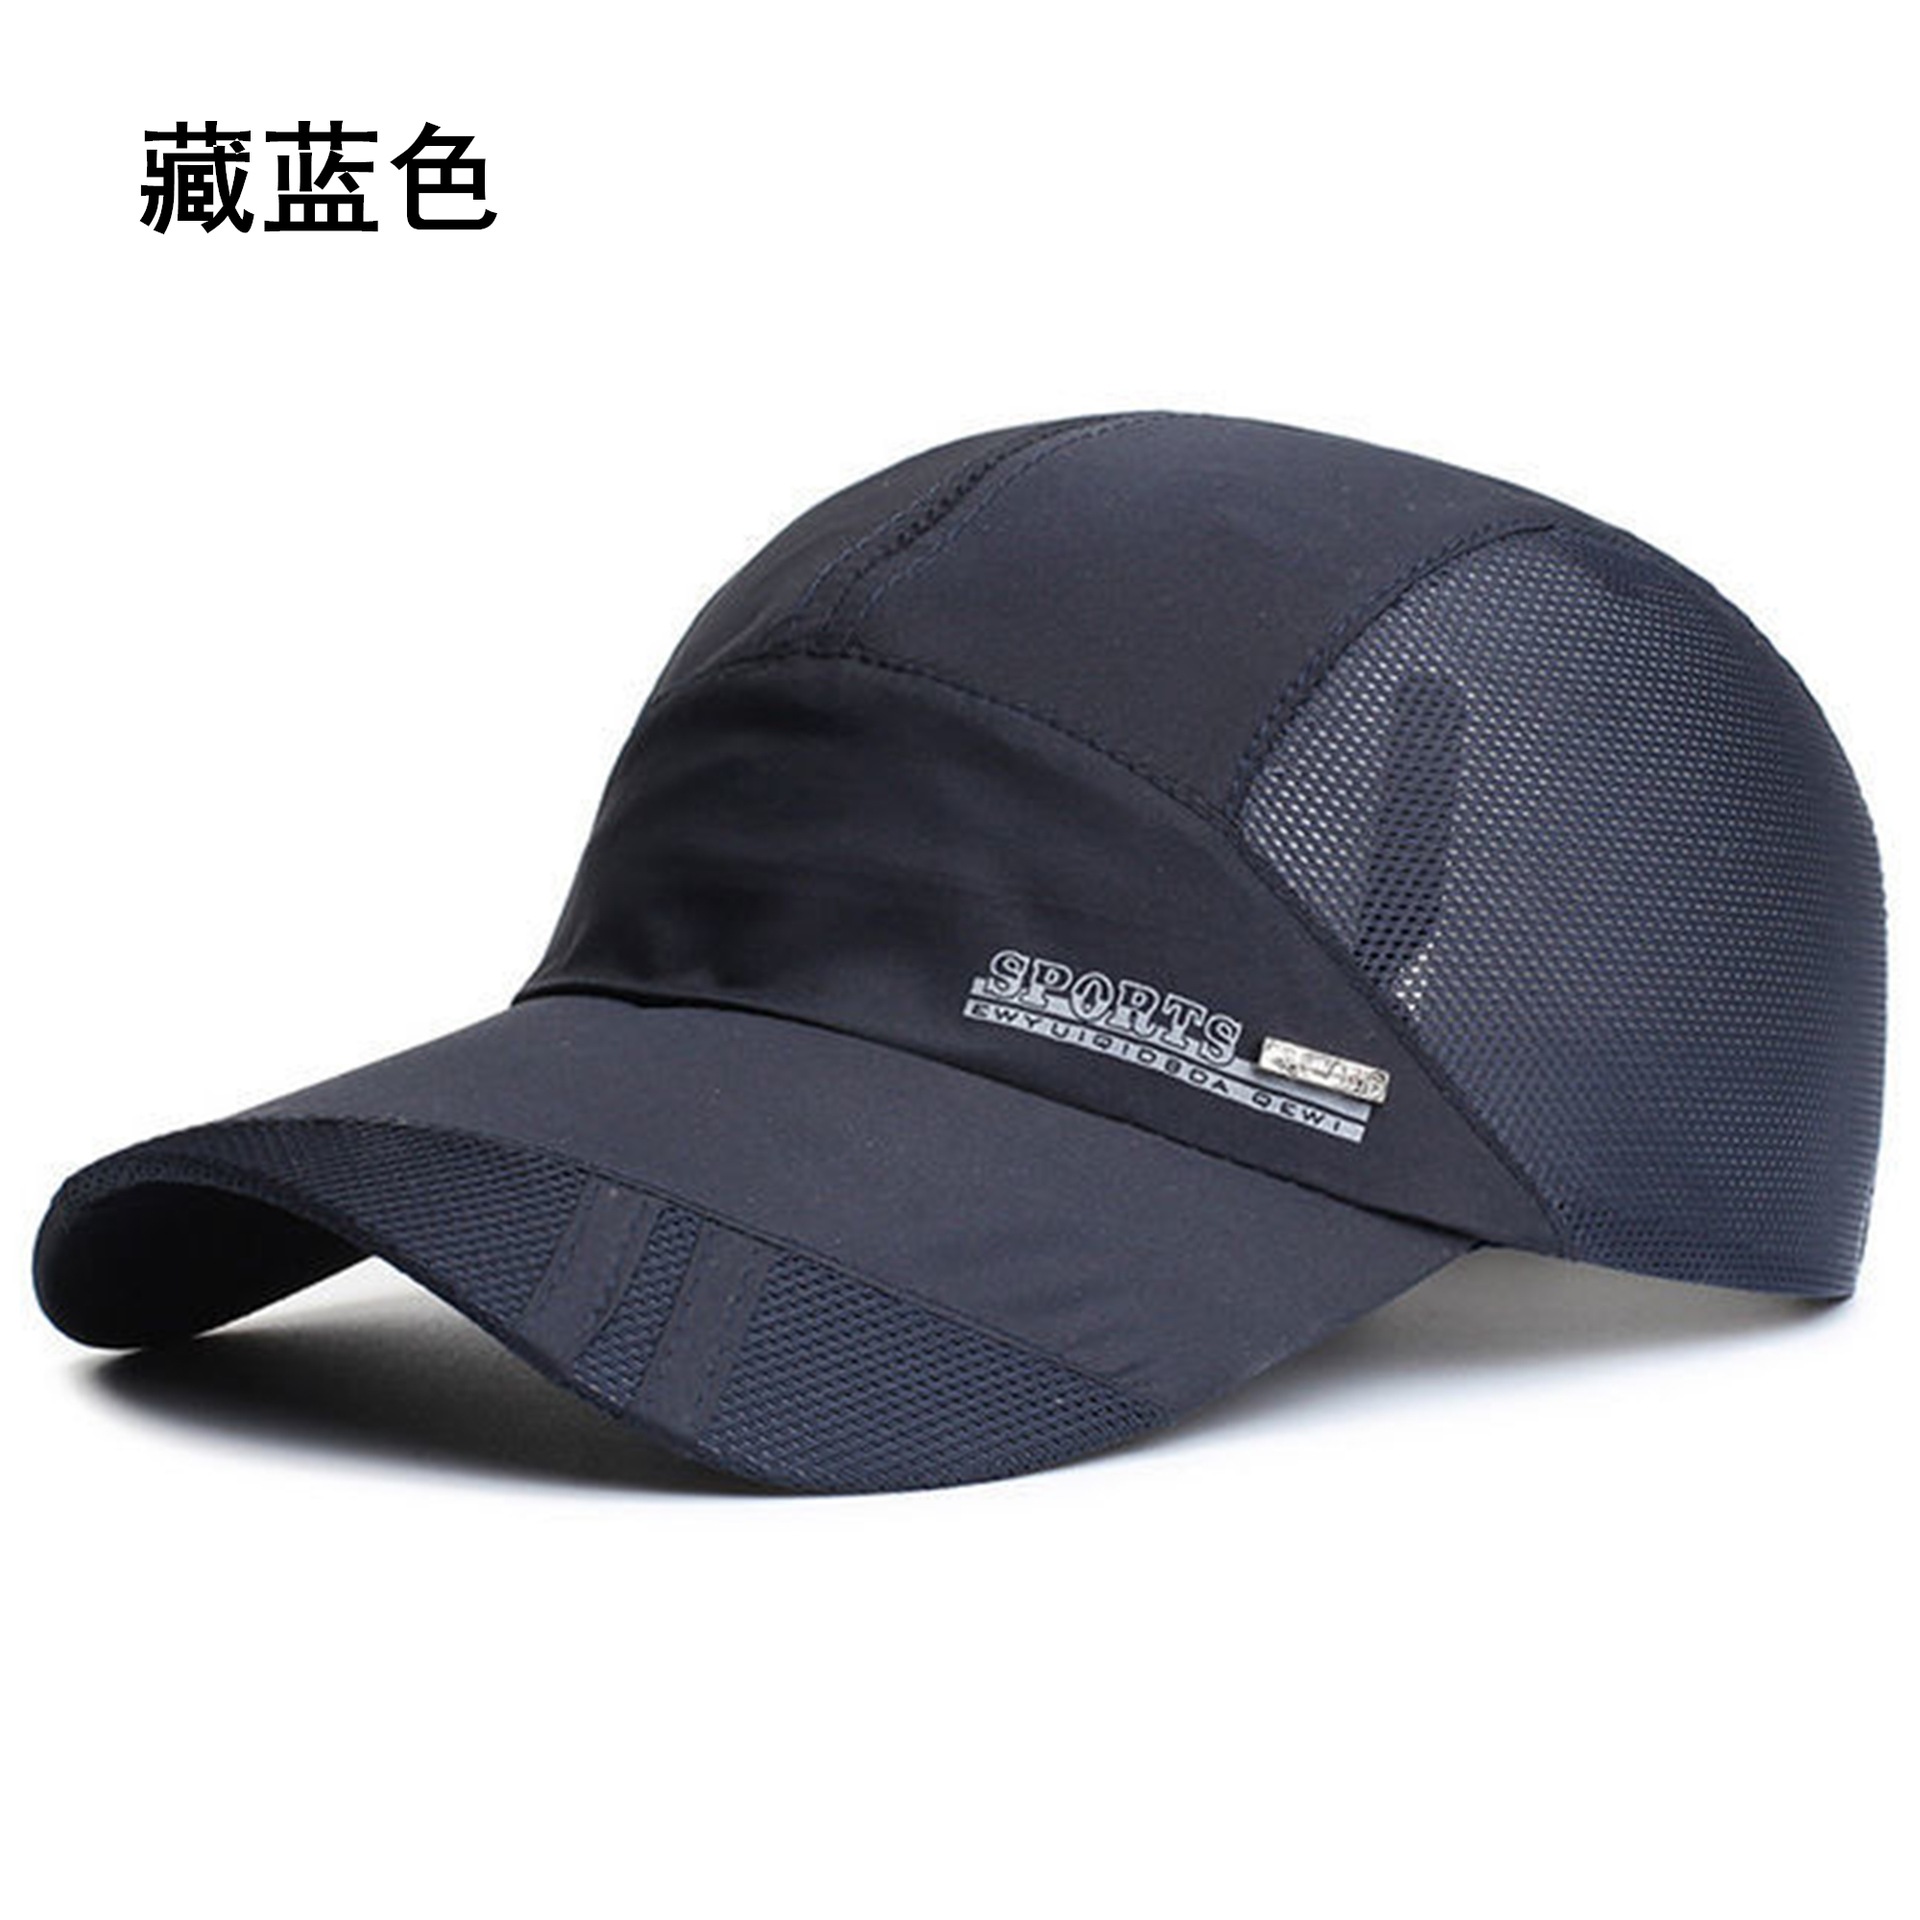 Hat Men's Spring and Summer Lightweight Sun-Proof Peaked Cap Breathable Outdoor Leisure Fishing Sun-Proof Baseball Sun Hat